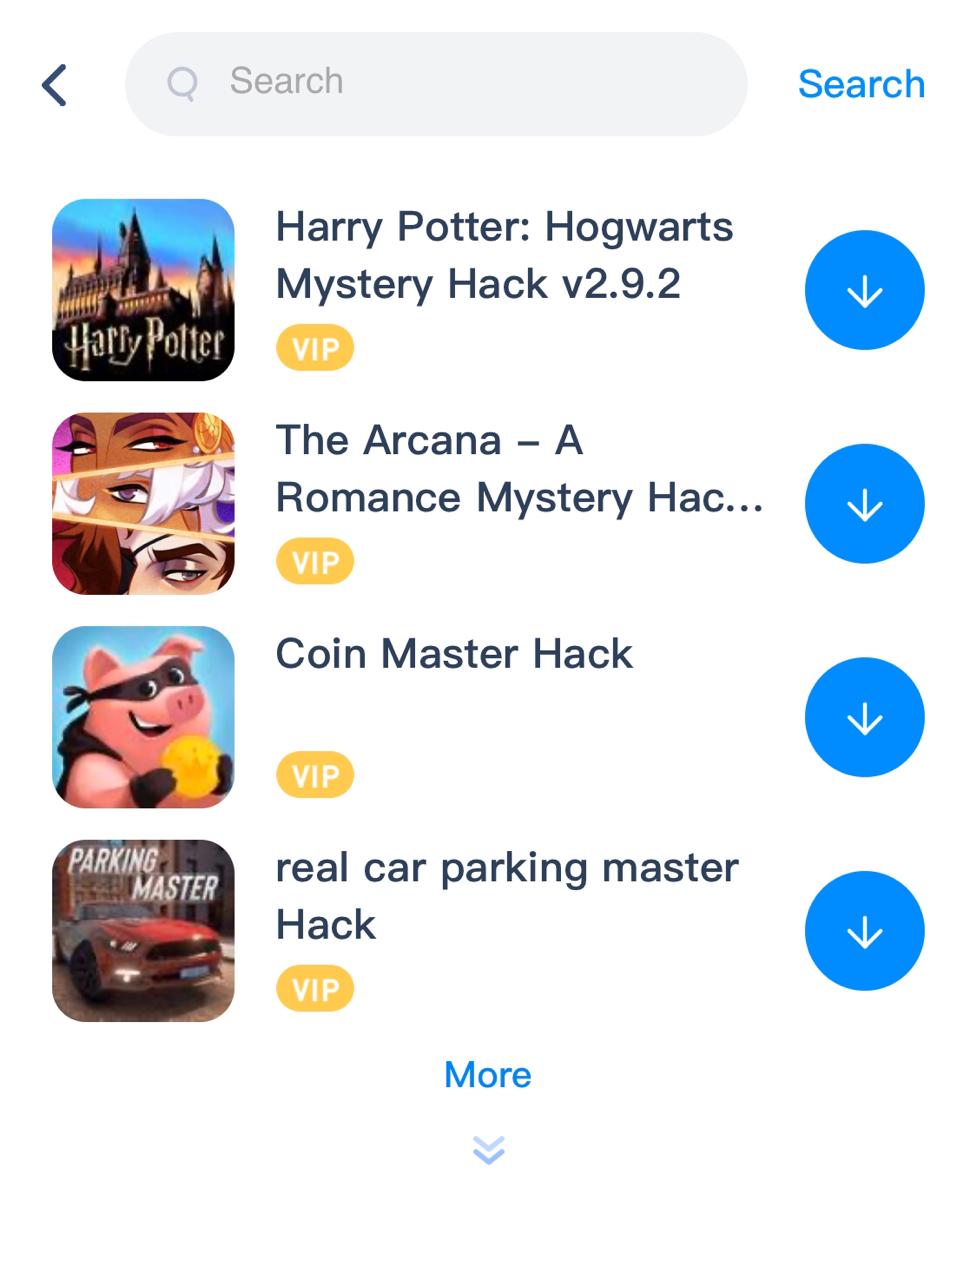 harry potter hack search results